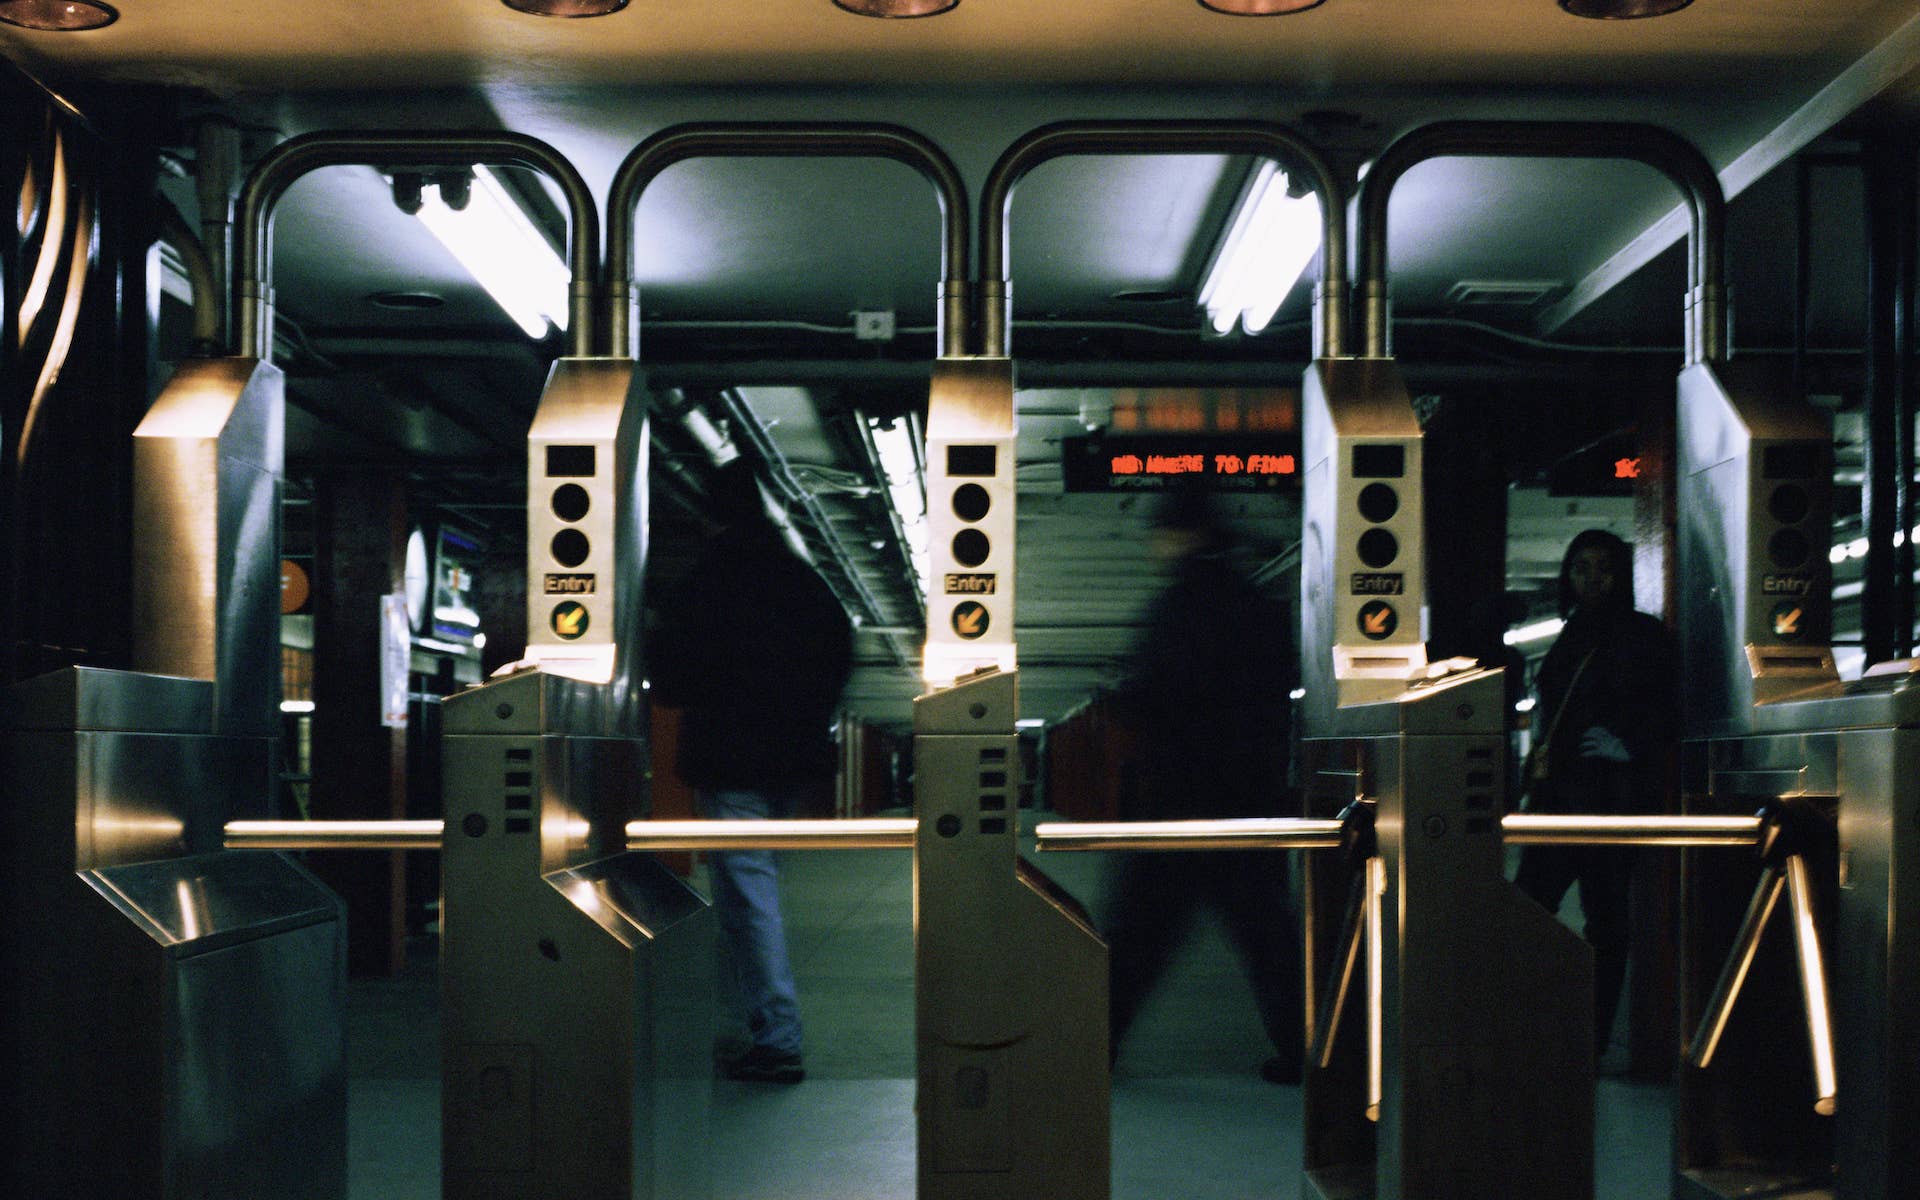 Queens subway fare evader’s repeated attempts to jump turnstile result in fatal fall